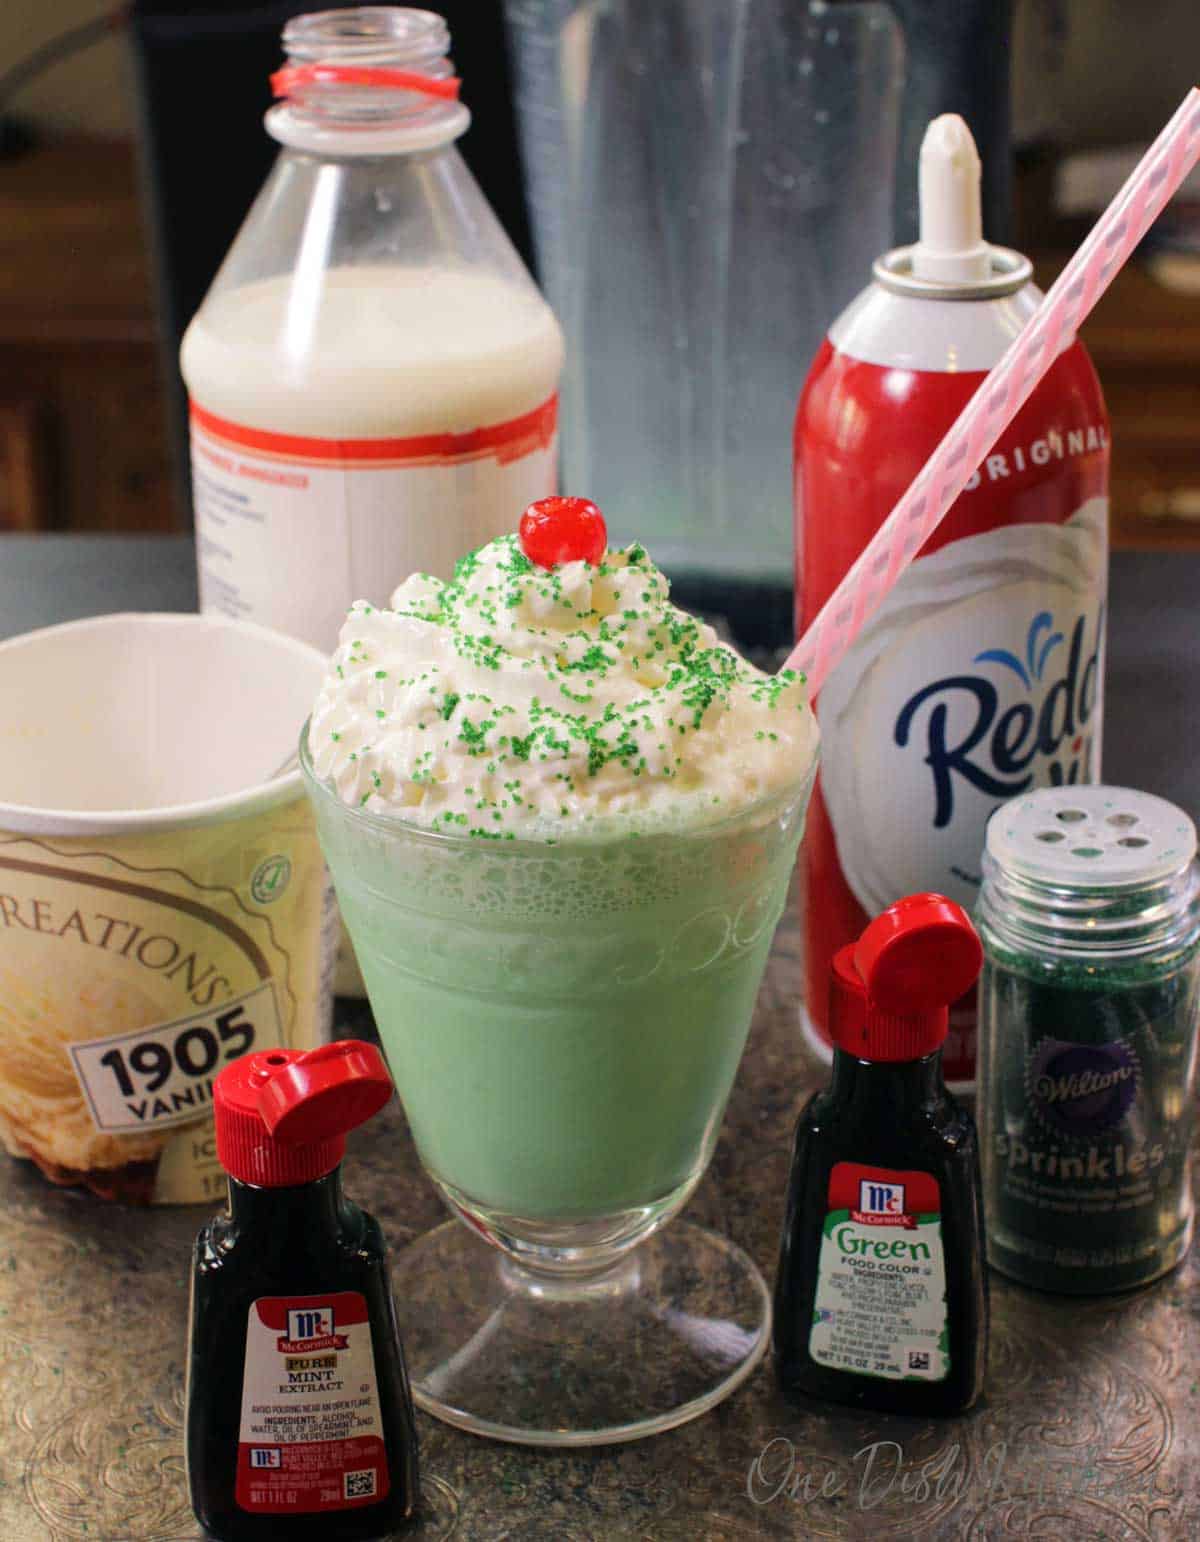 Ingredients in a shamrock shake on a tray- milk, whipped cream, vanilla ice cream, sprinkles, green food coloring, and a jar of mint extract.